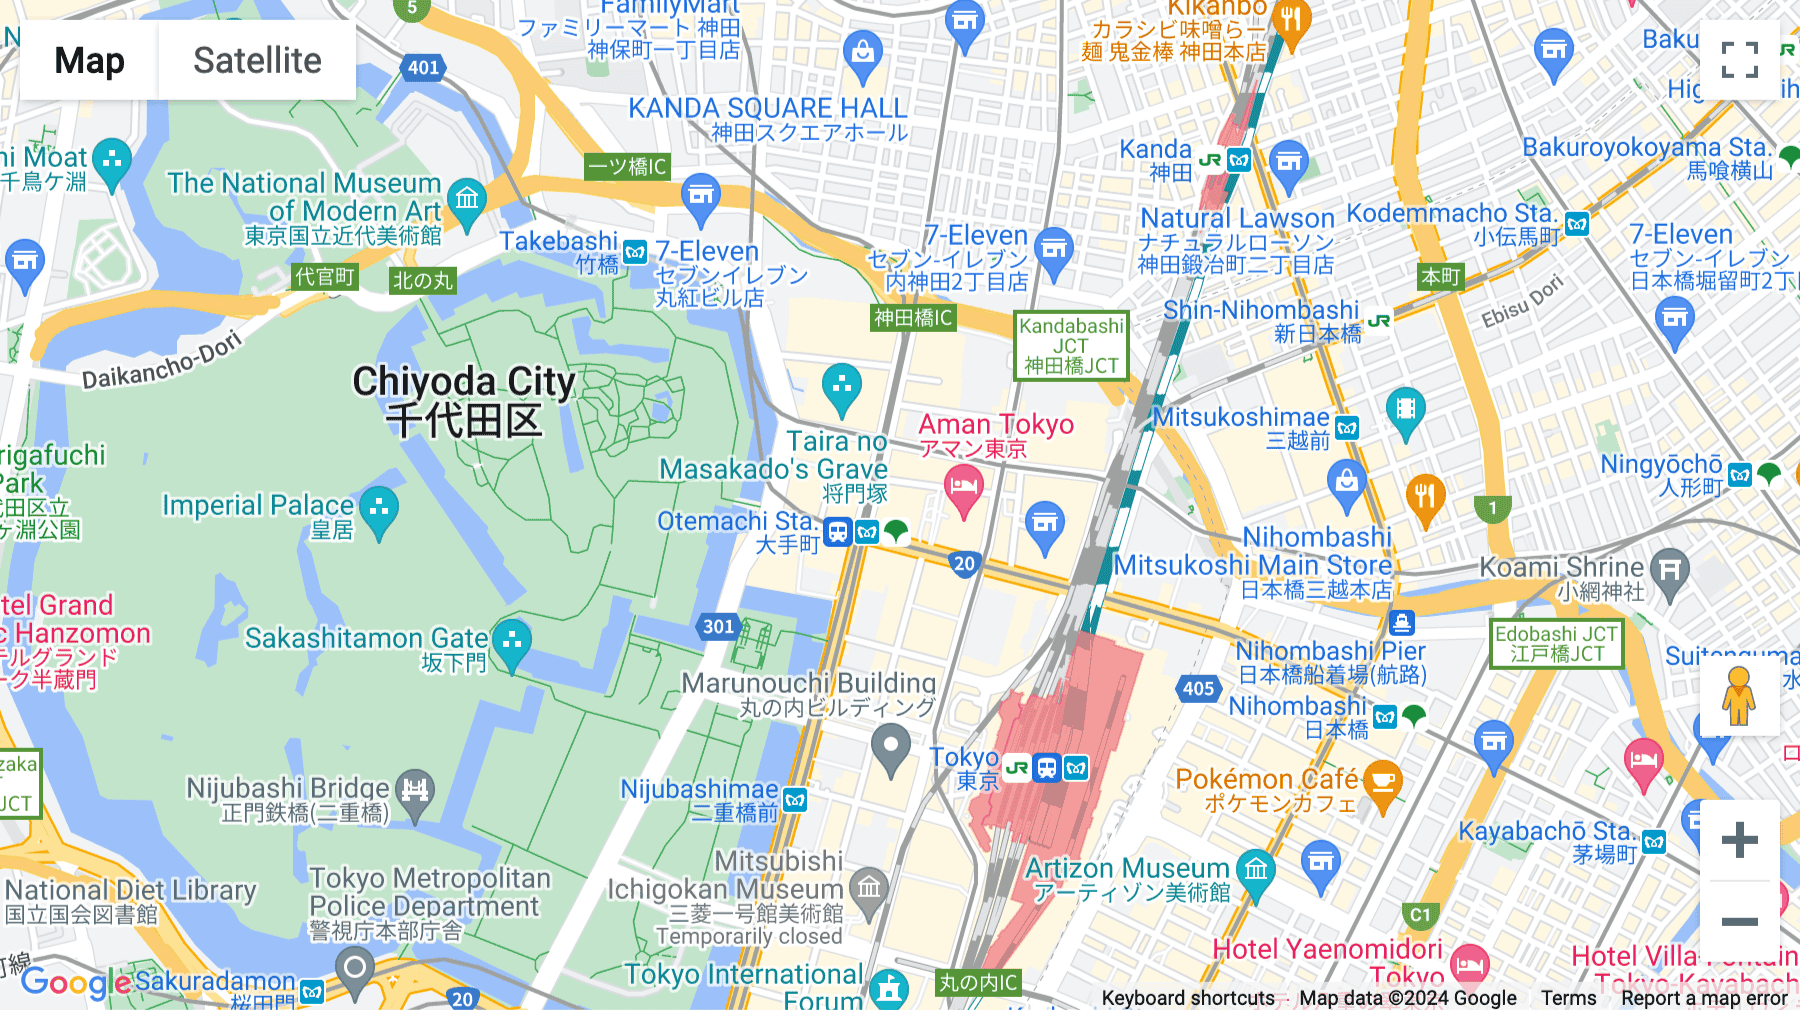 Click for interative map of Otemachi First Square, East Tower 4th Floor, 1-5-1, Otemachi, Chiyoda-ku, Tokyo